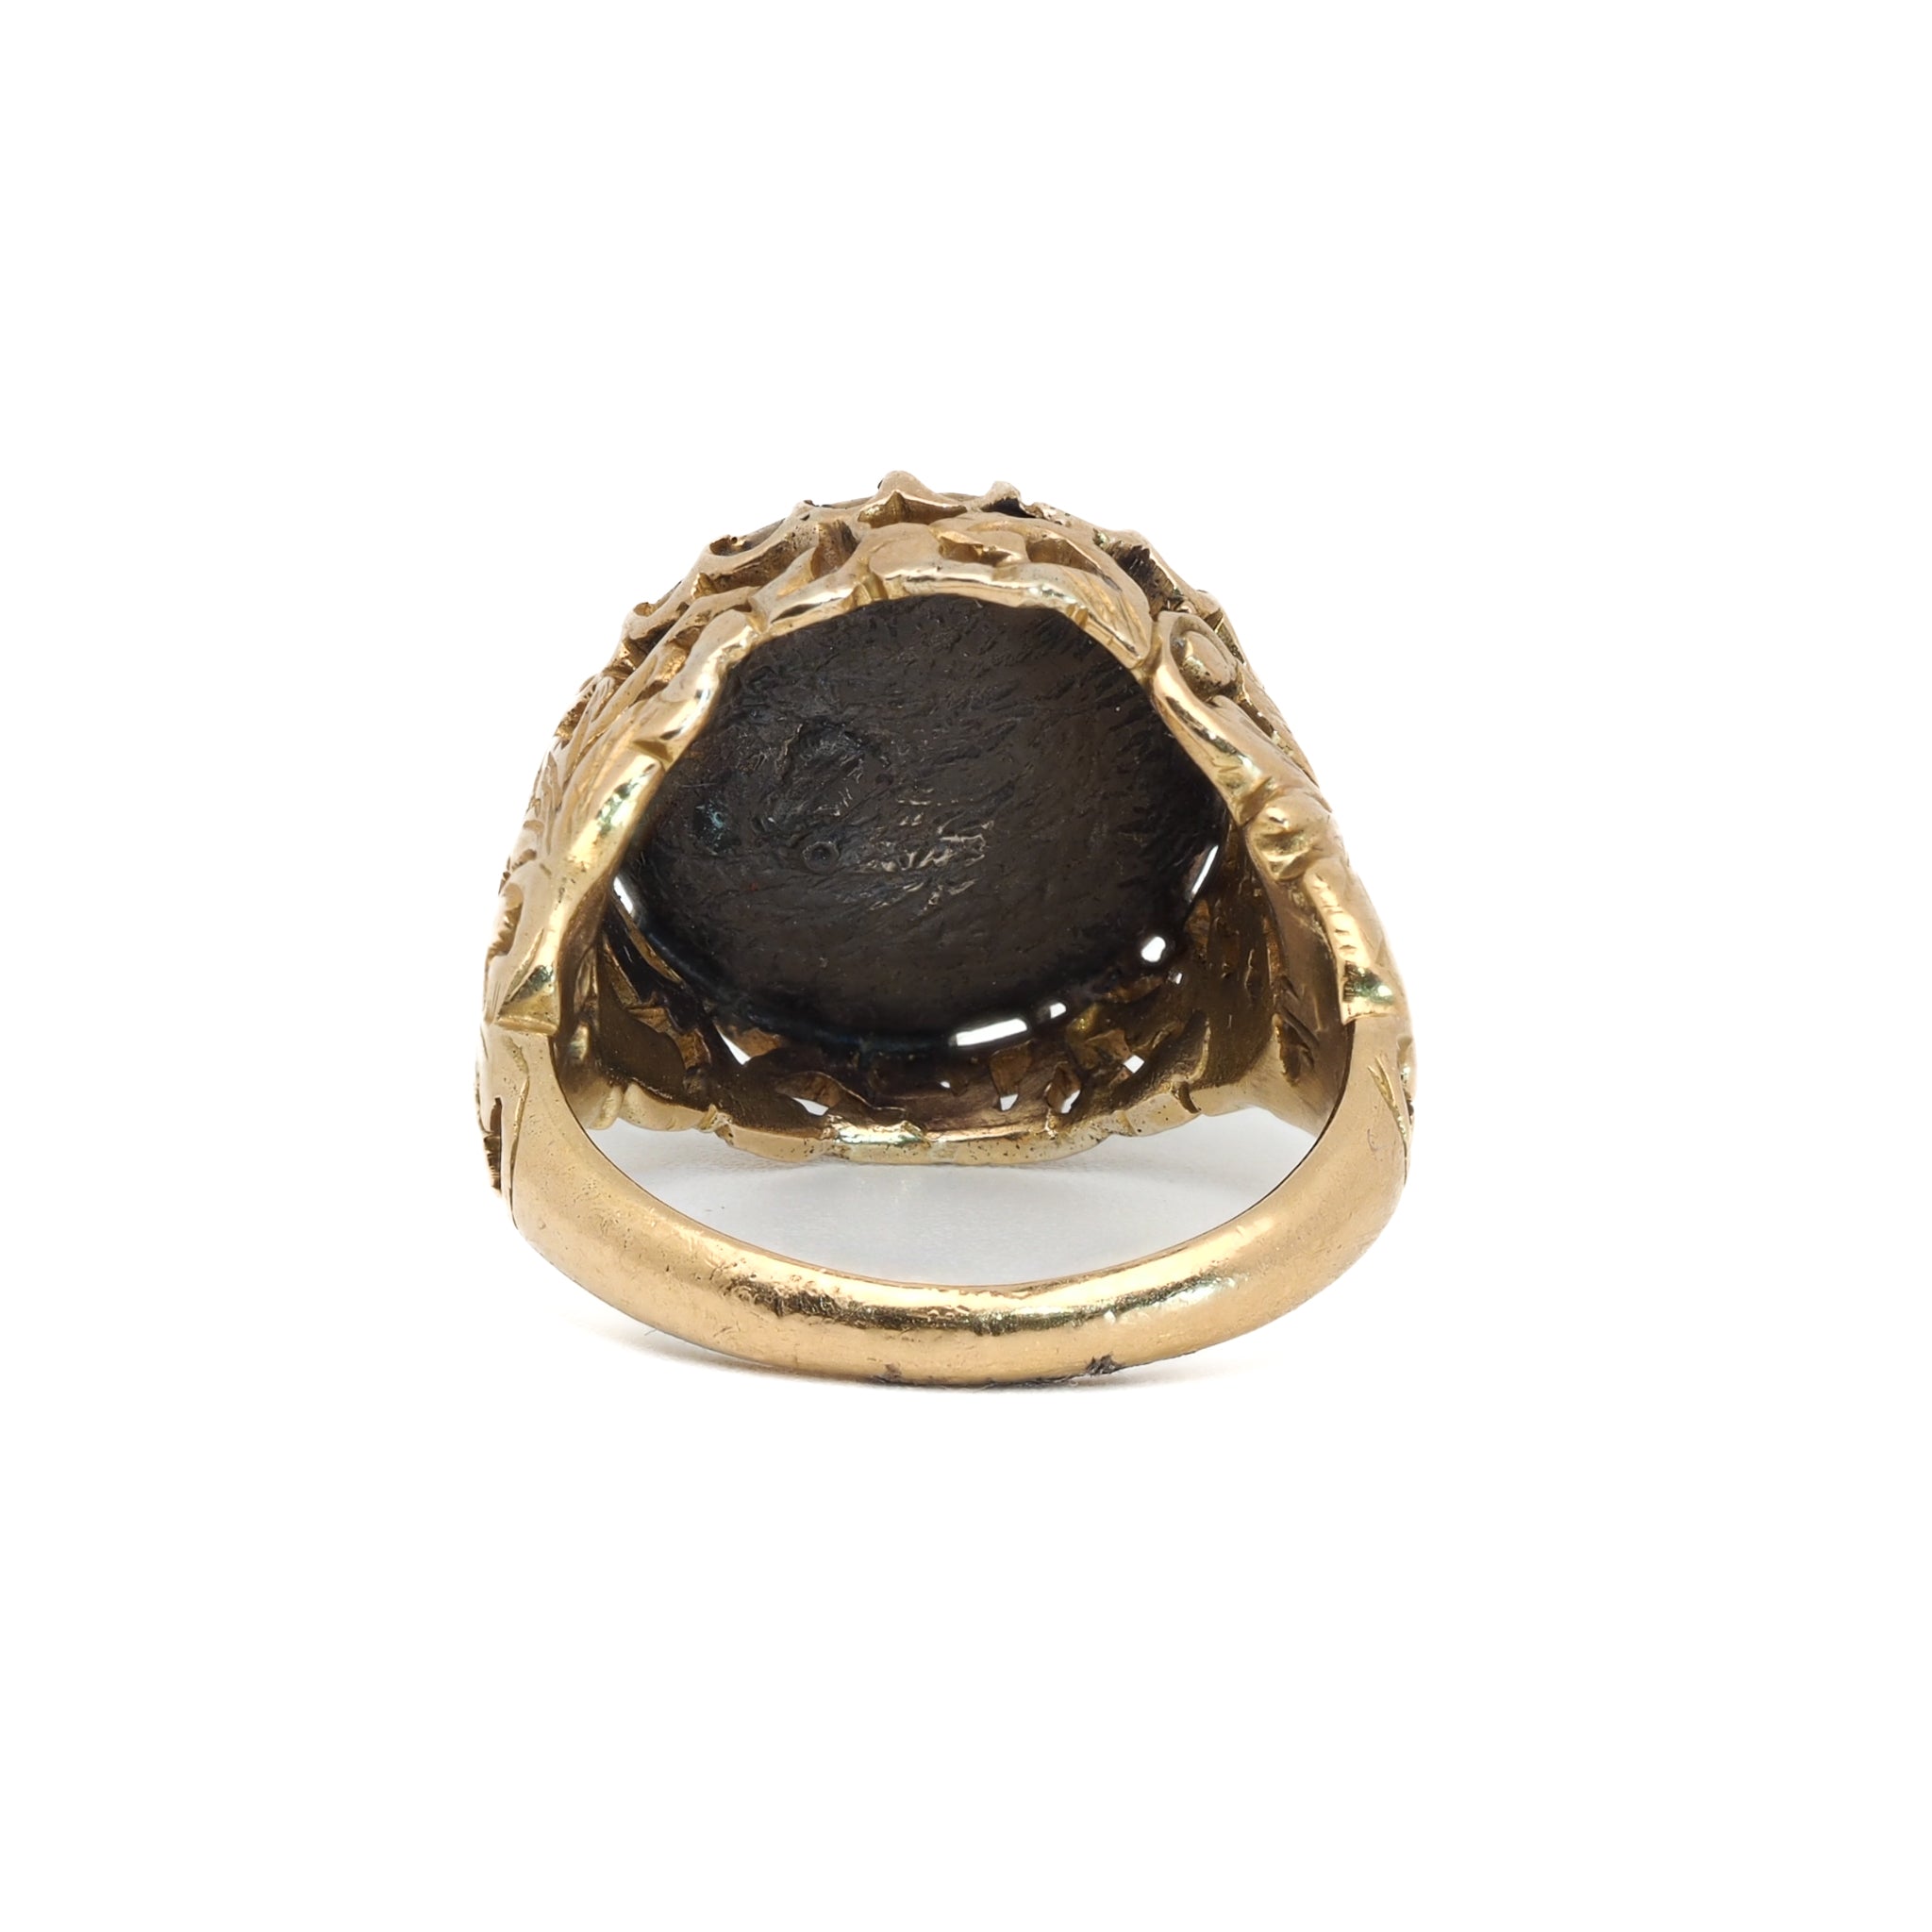 the Elegant Handcrafted Gold and Diamond Ring featuring a stunning arrangement of 1.25ct brown diamonds on the band.